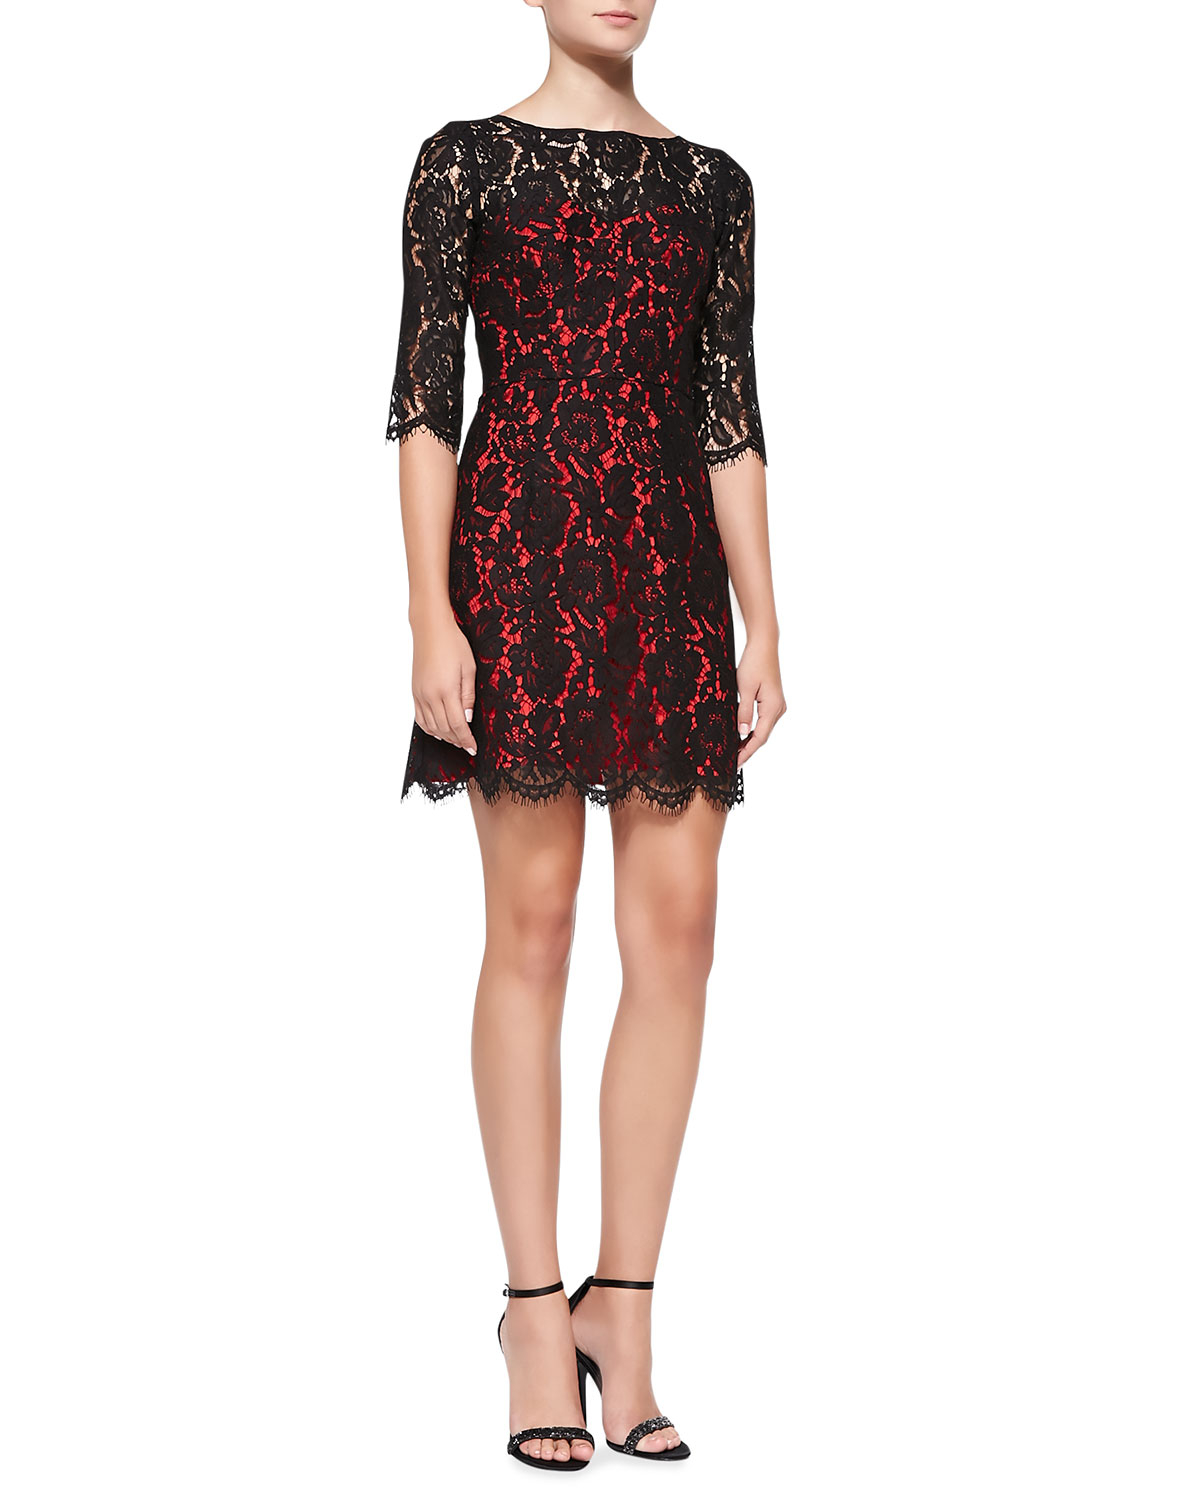 Lyst - Milly Ally Floral Lace Cocktail Dress in Red